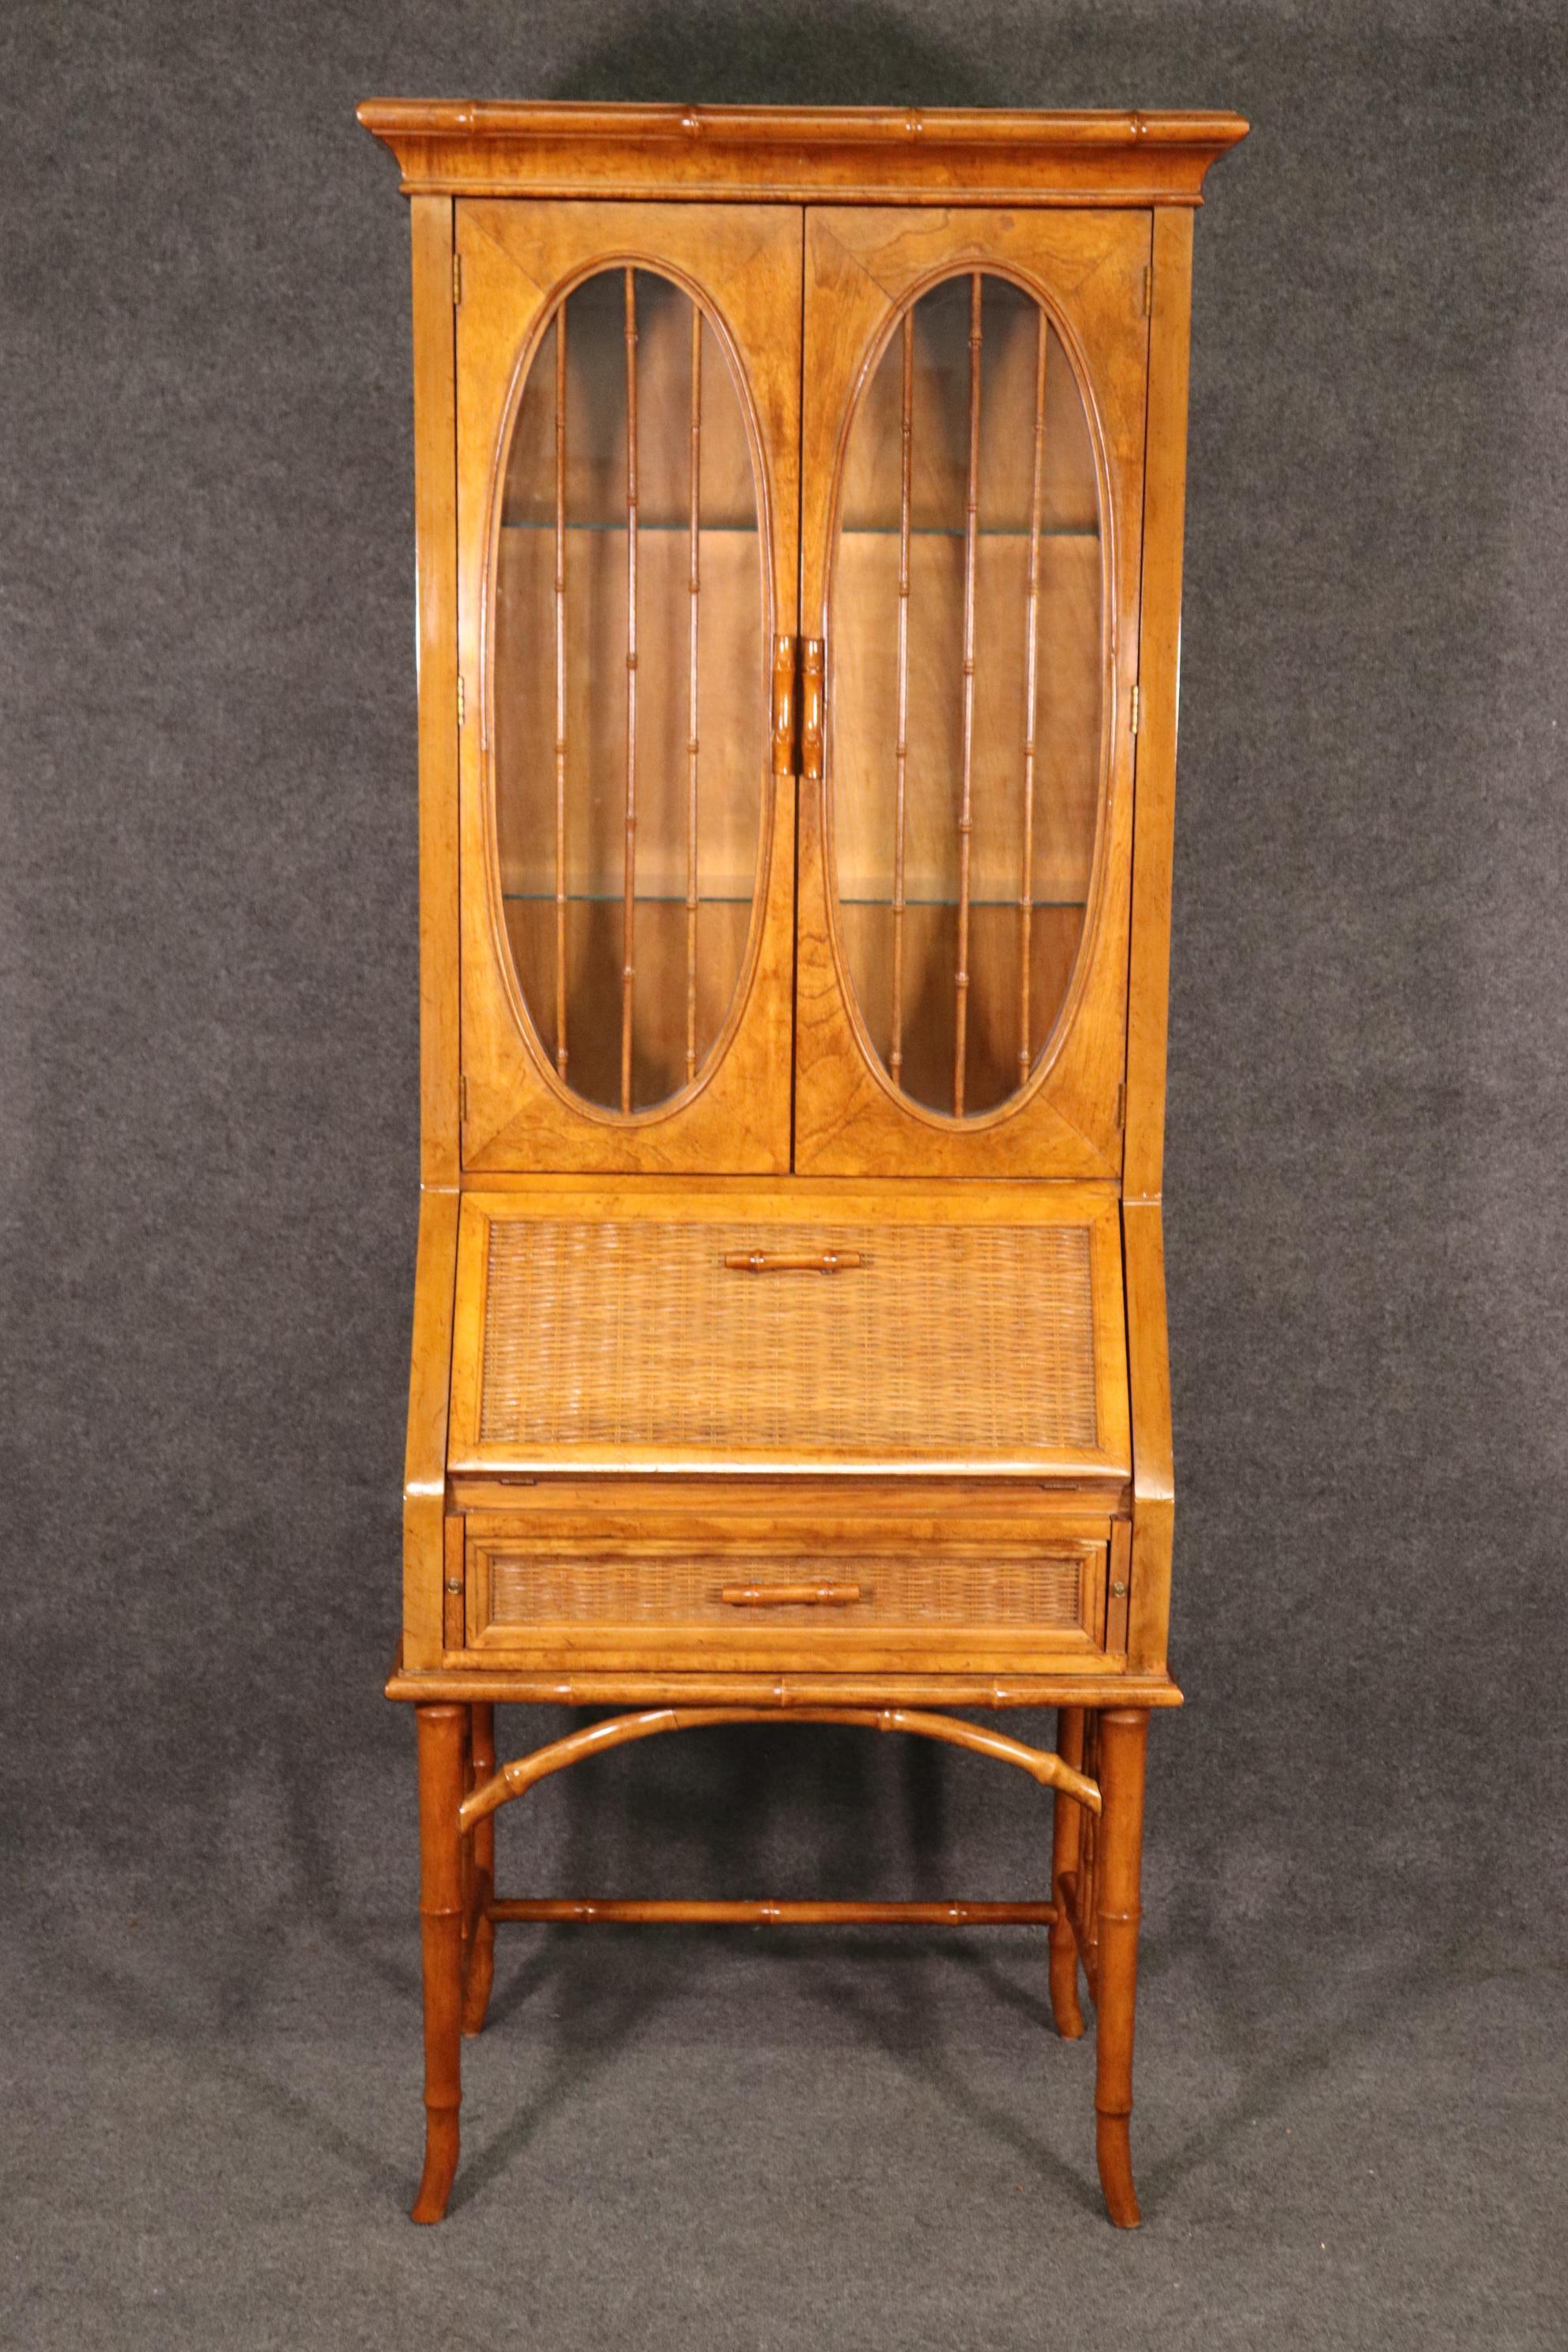 This Hollywood Regency Style Faux Bamboo 2 Piece Secretary desk made by American of Martinsville is a super handsome piece that brings a nice touch of sophistication into your home or office. American of Martinsville was established in 1906 and